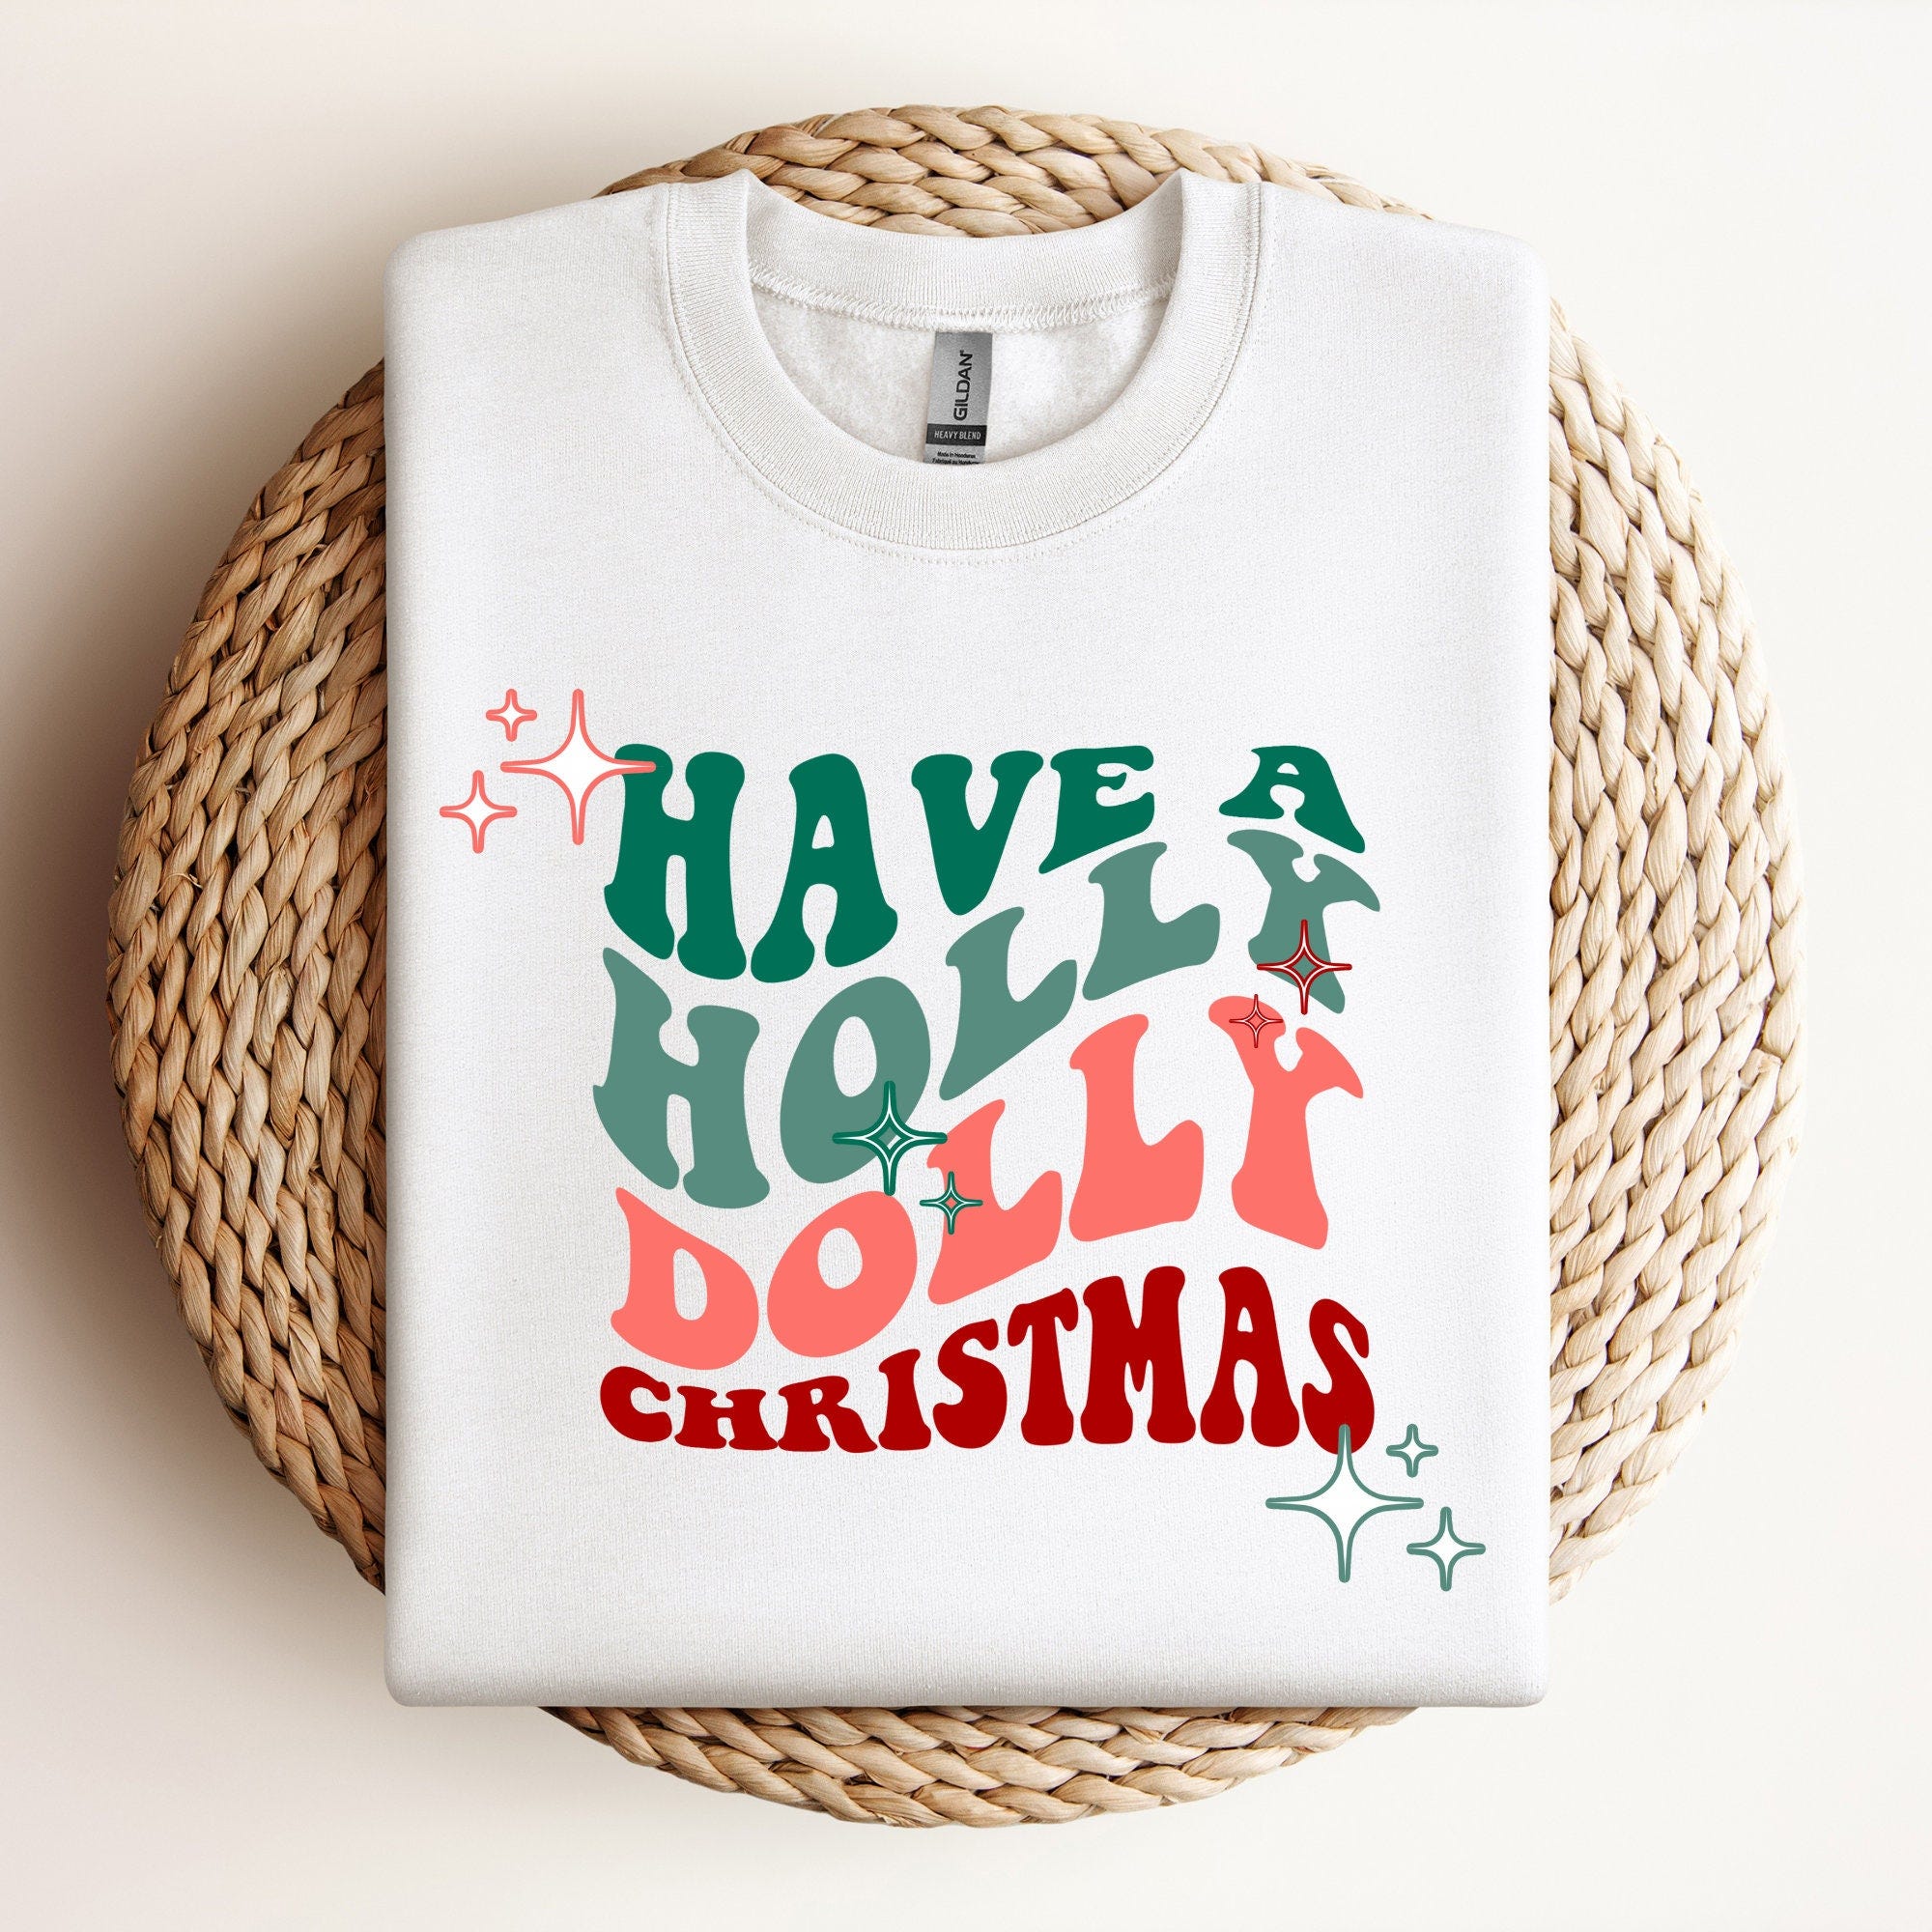 Have a Holly Dolly Christmas Womens Crewneck Sweatshirt {Sweater Christmas Winter Holiday Ugly Sweater Cute}